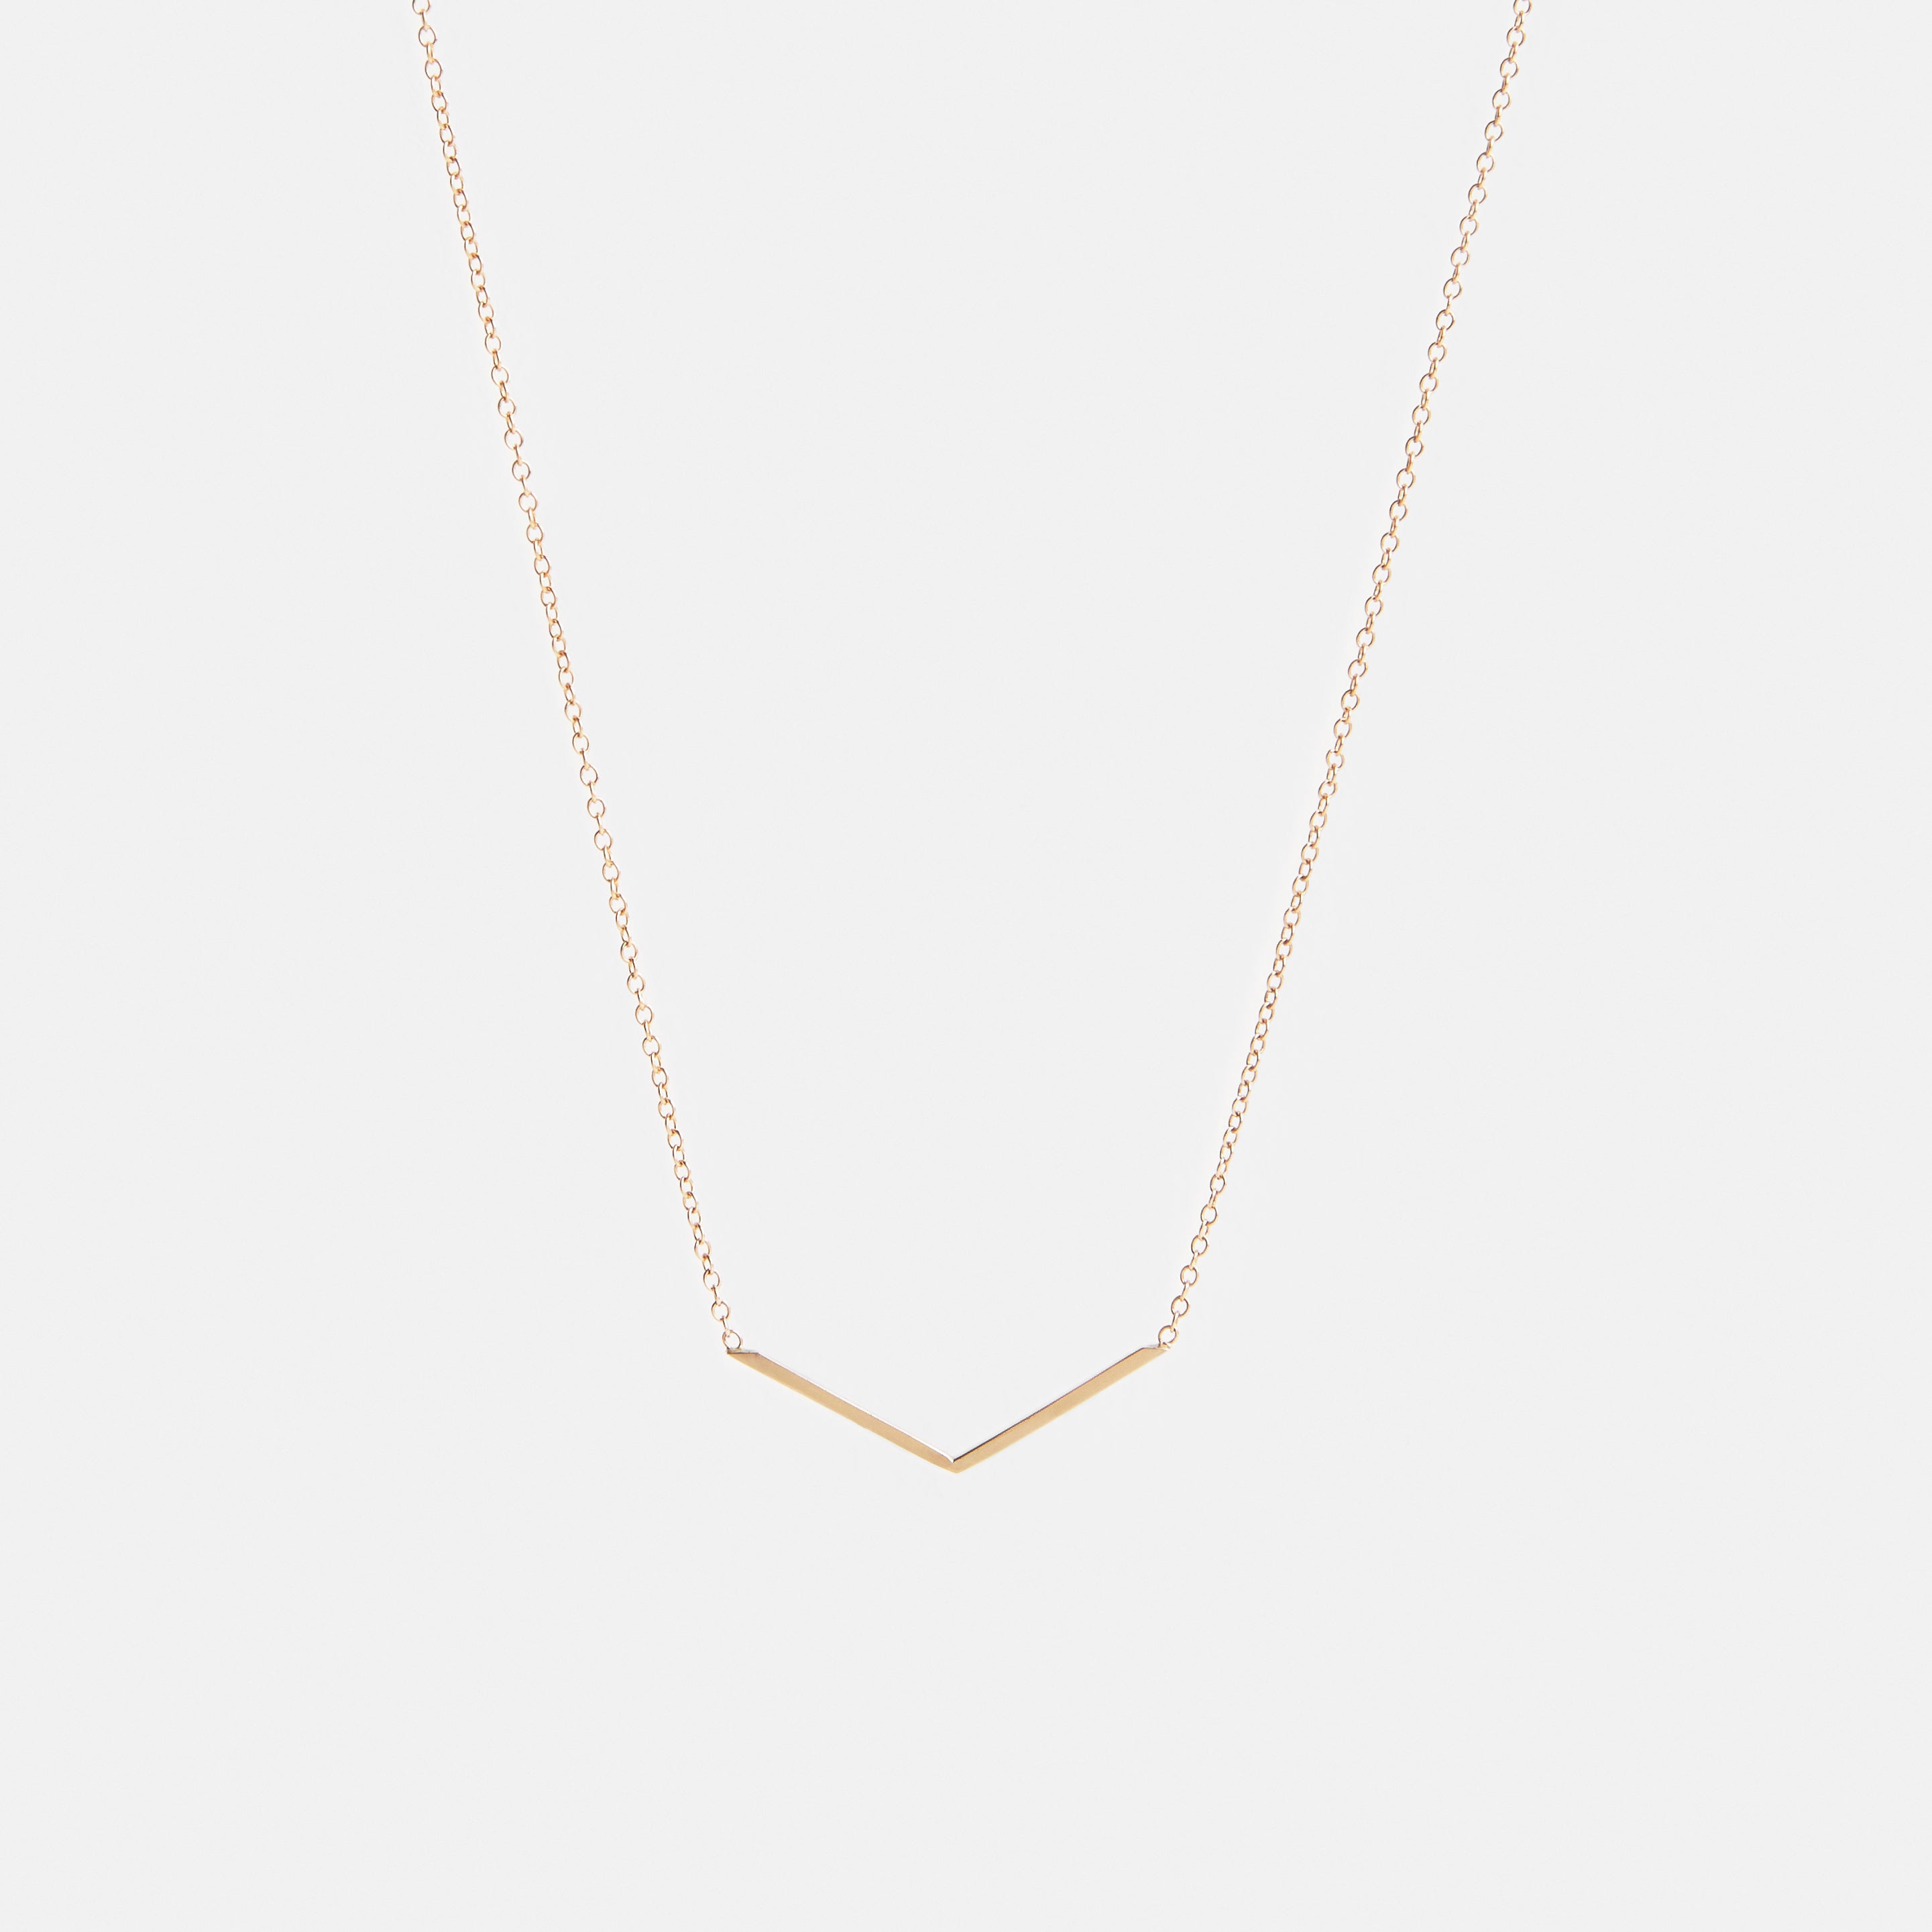 Avi Designer Necklace in 14k Gold By SHW Fine Jewelry NYC